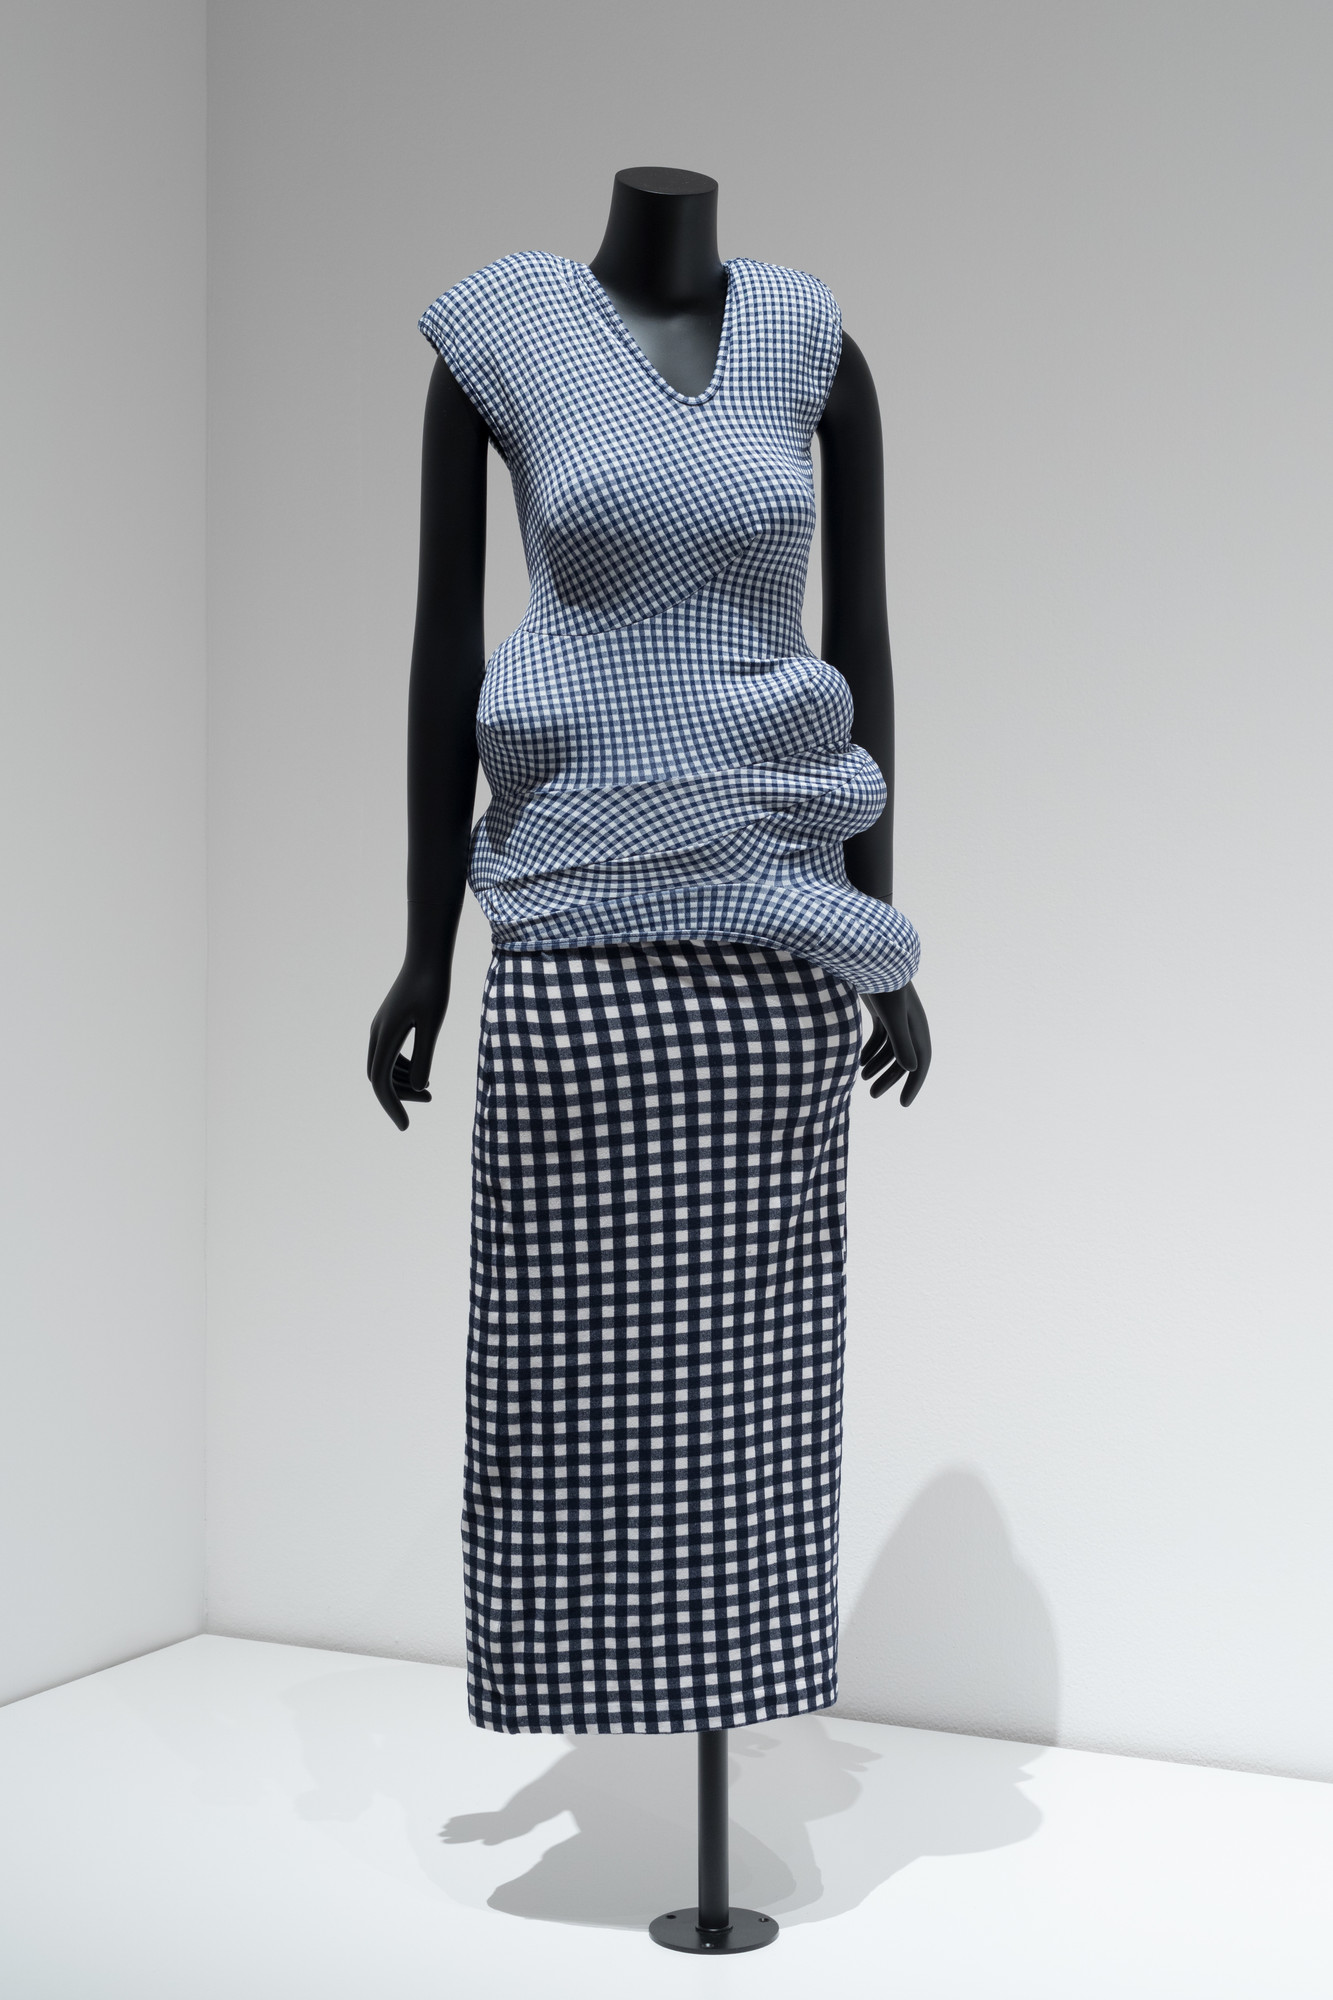 Rei Kawakubo (Japanese, born 1942). Comme des Garçons (Japan, founded 1973). Ensemble (bodice and skirt). Spring/summer 1997. Body Meets Dress--Dress Meets Body collection. Stretch polyester. Indianapolis Museum of Art. Fashion Arts Society Acquisition Fund. Purchased with funds provided by F. Timothy and Nancy Nagler